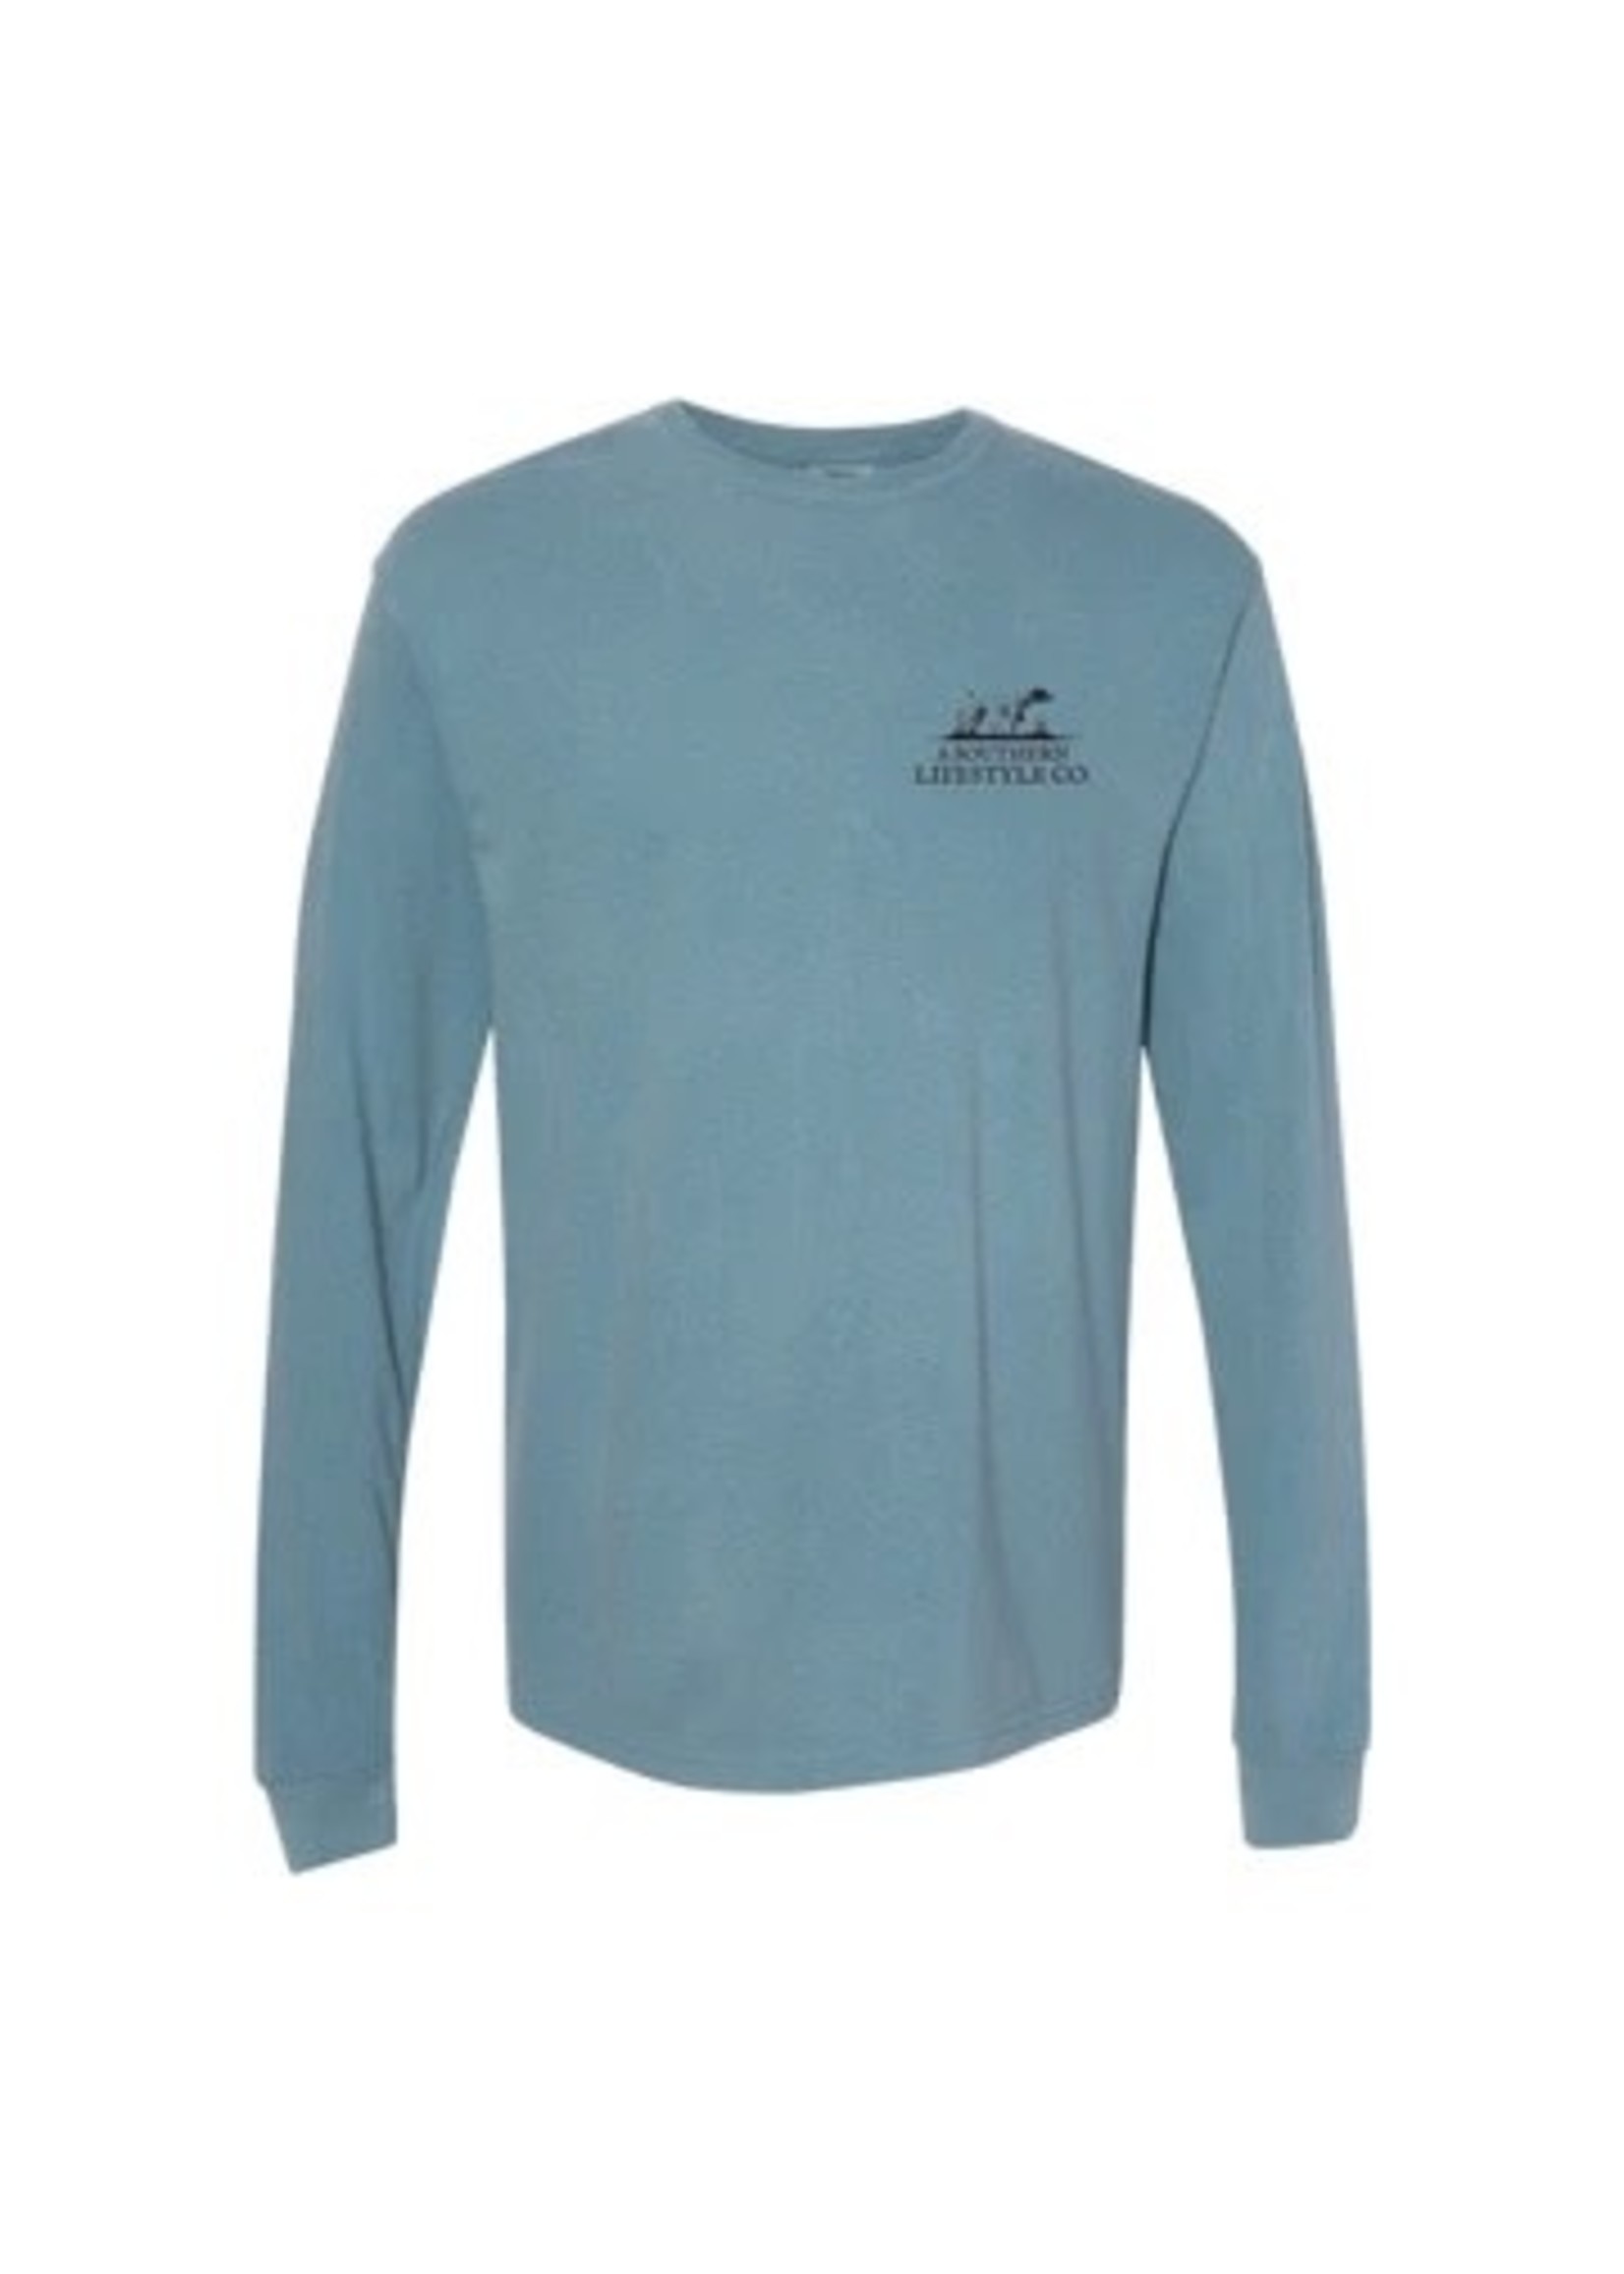 A Southern Lifestyle Company Point South Long-Sleeve Tee